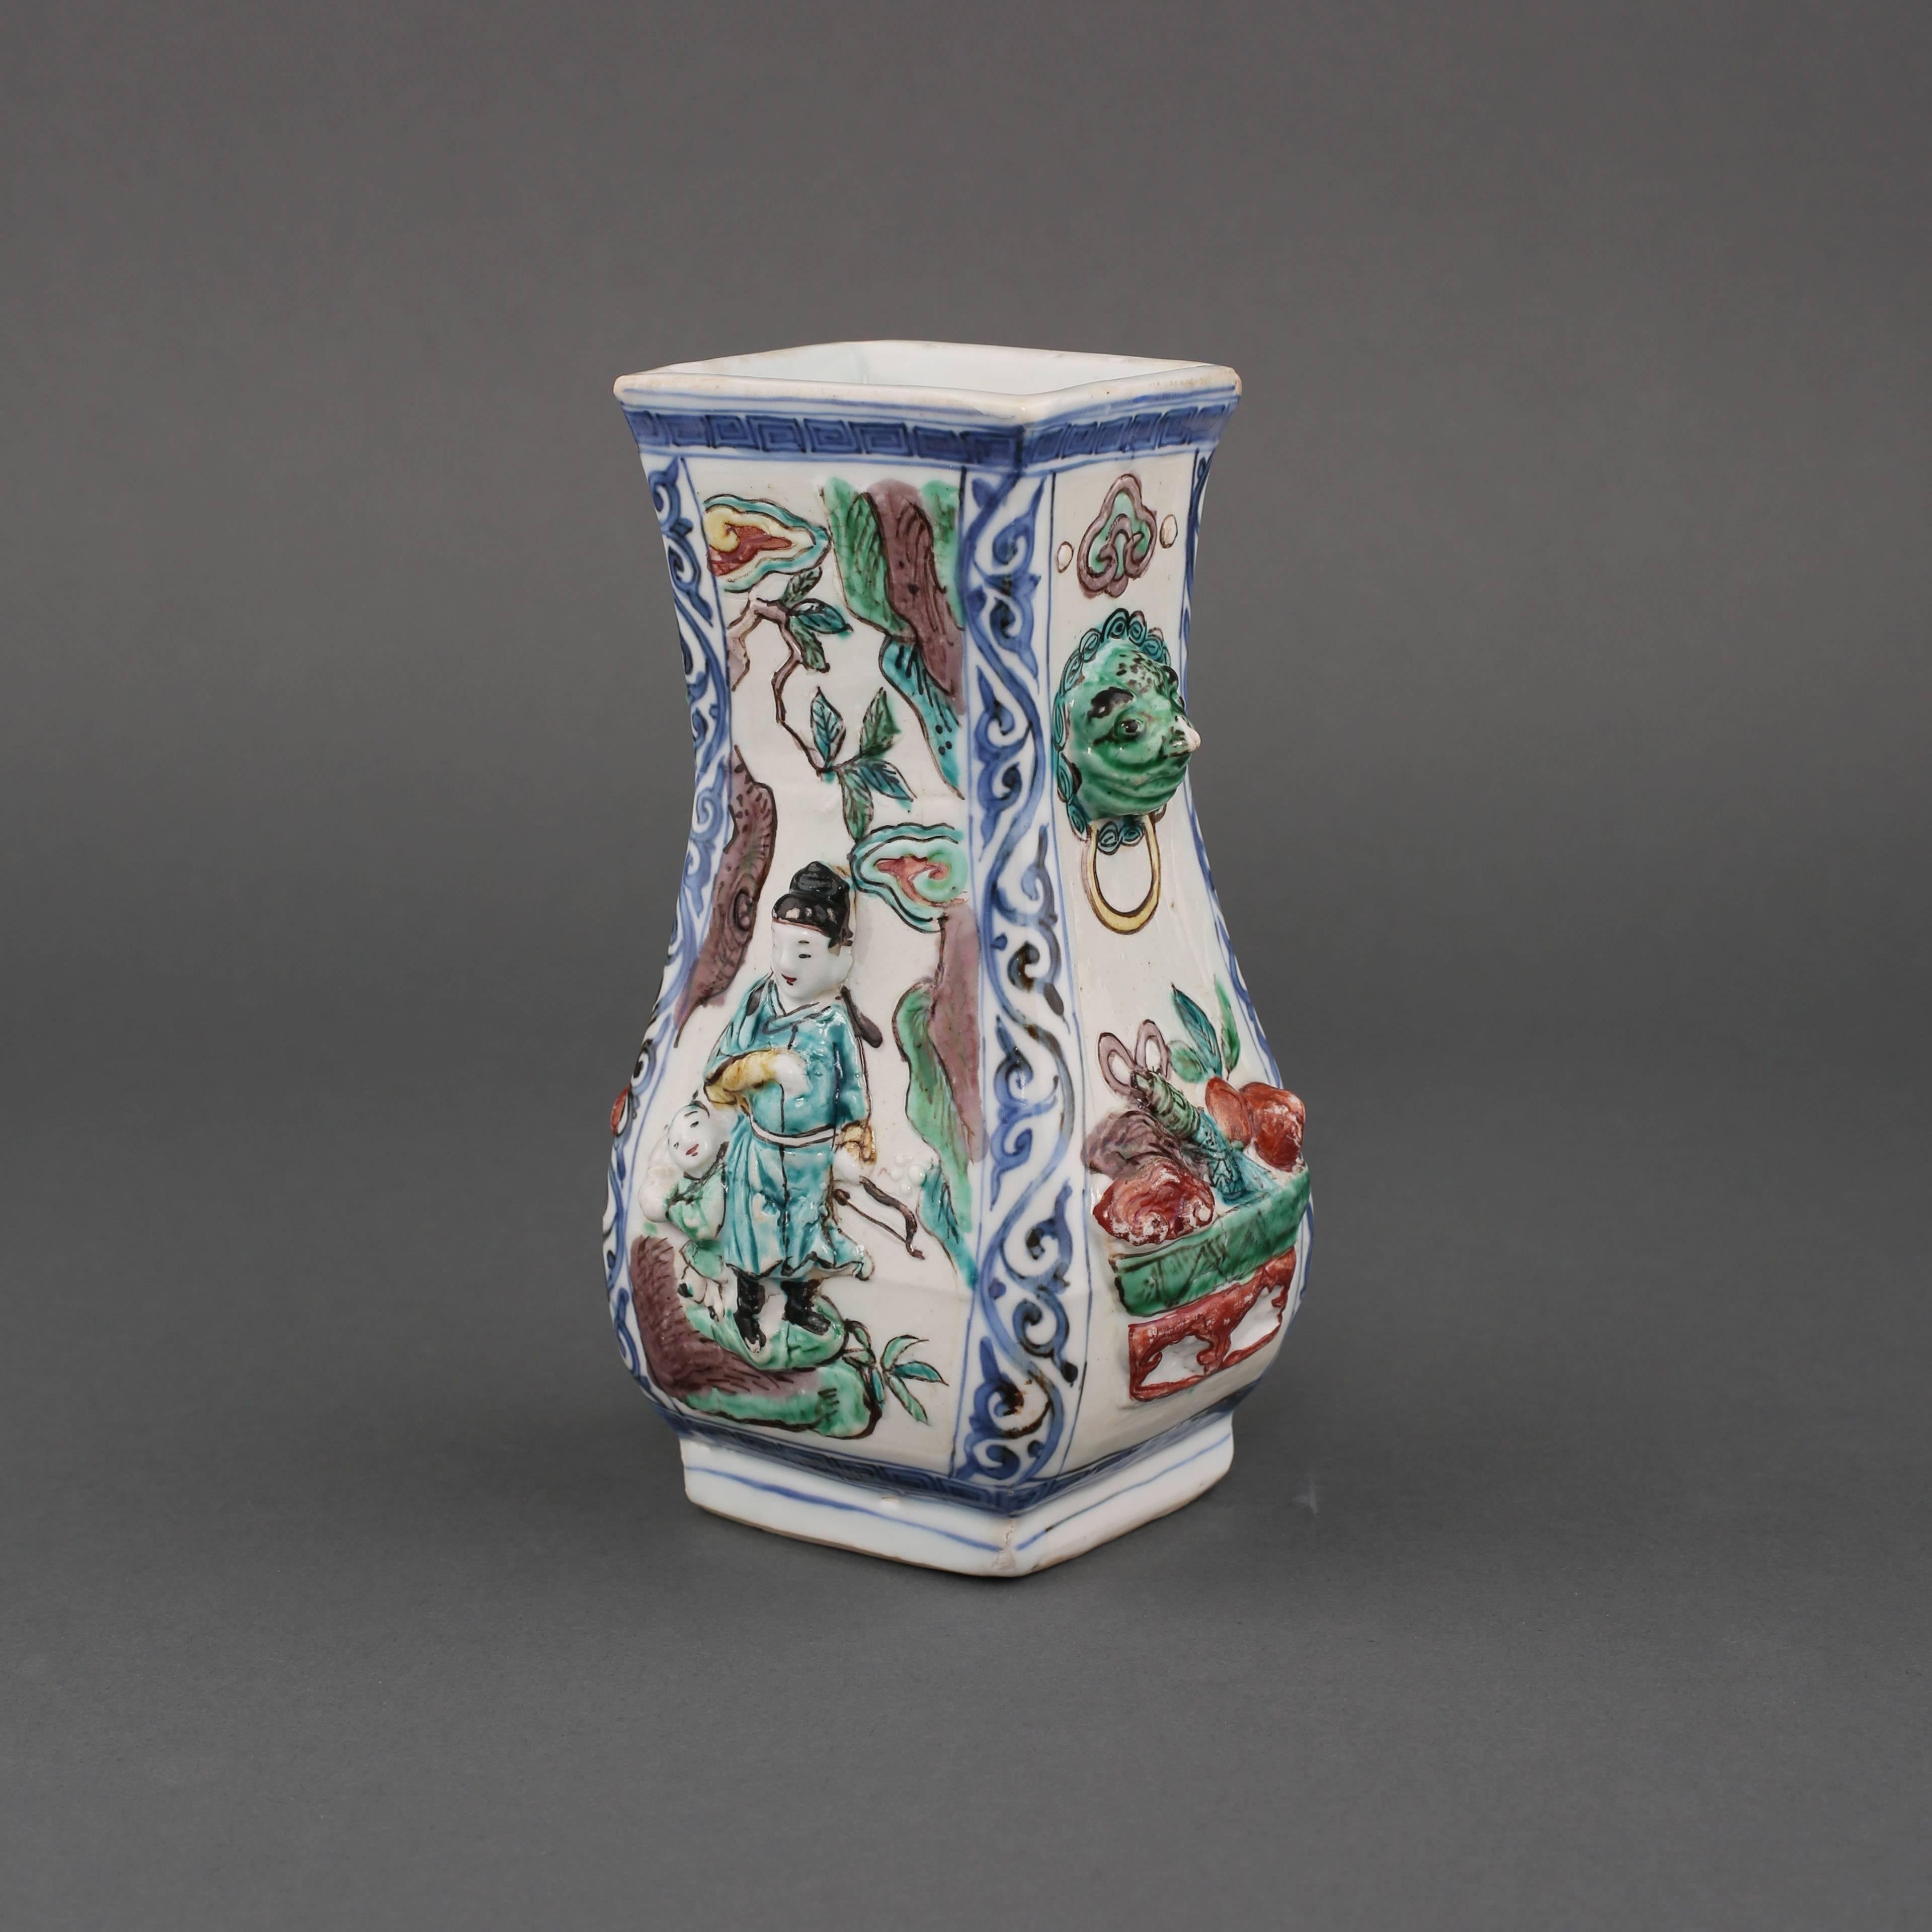 A Chinese porcelain wucai and underglaze blue and white pear shaped rectangular vase with two animal masks and rim handles, moulded on each side, one with a bearded man standing next to a Buddhist lion on rockwork, beneath a pine tree and the moon,